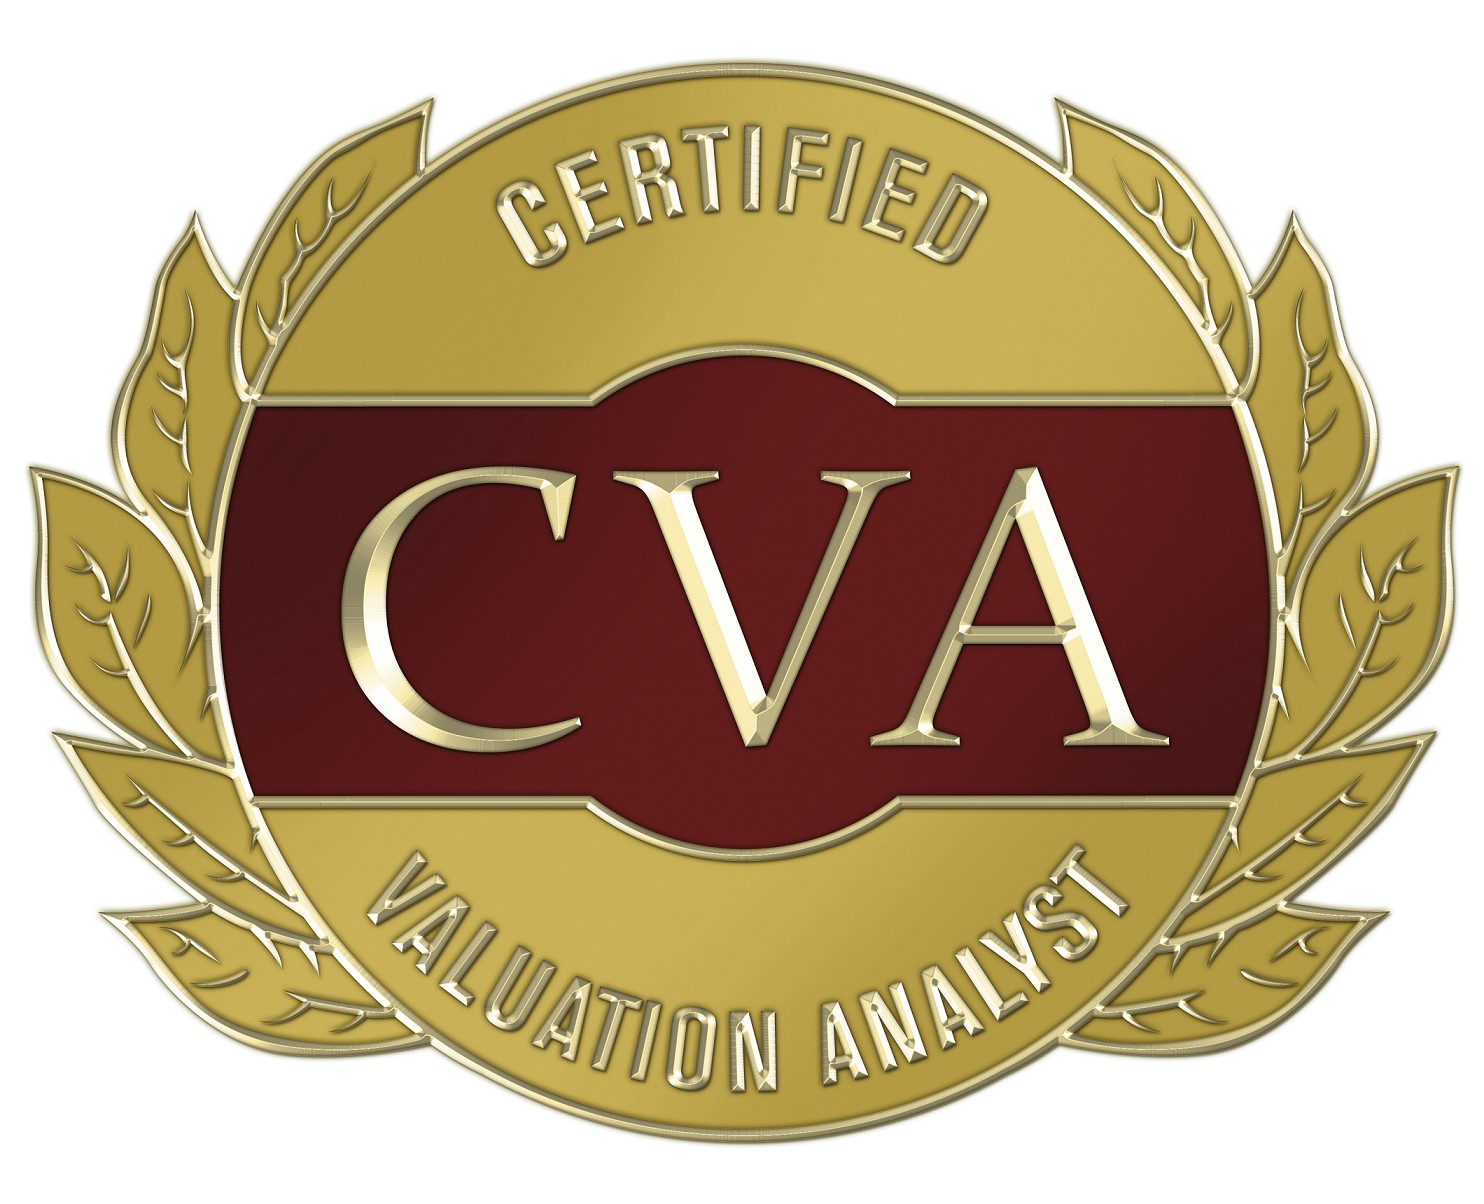 Certified Valuation Analyst Training